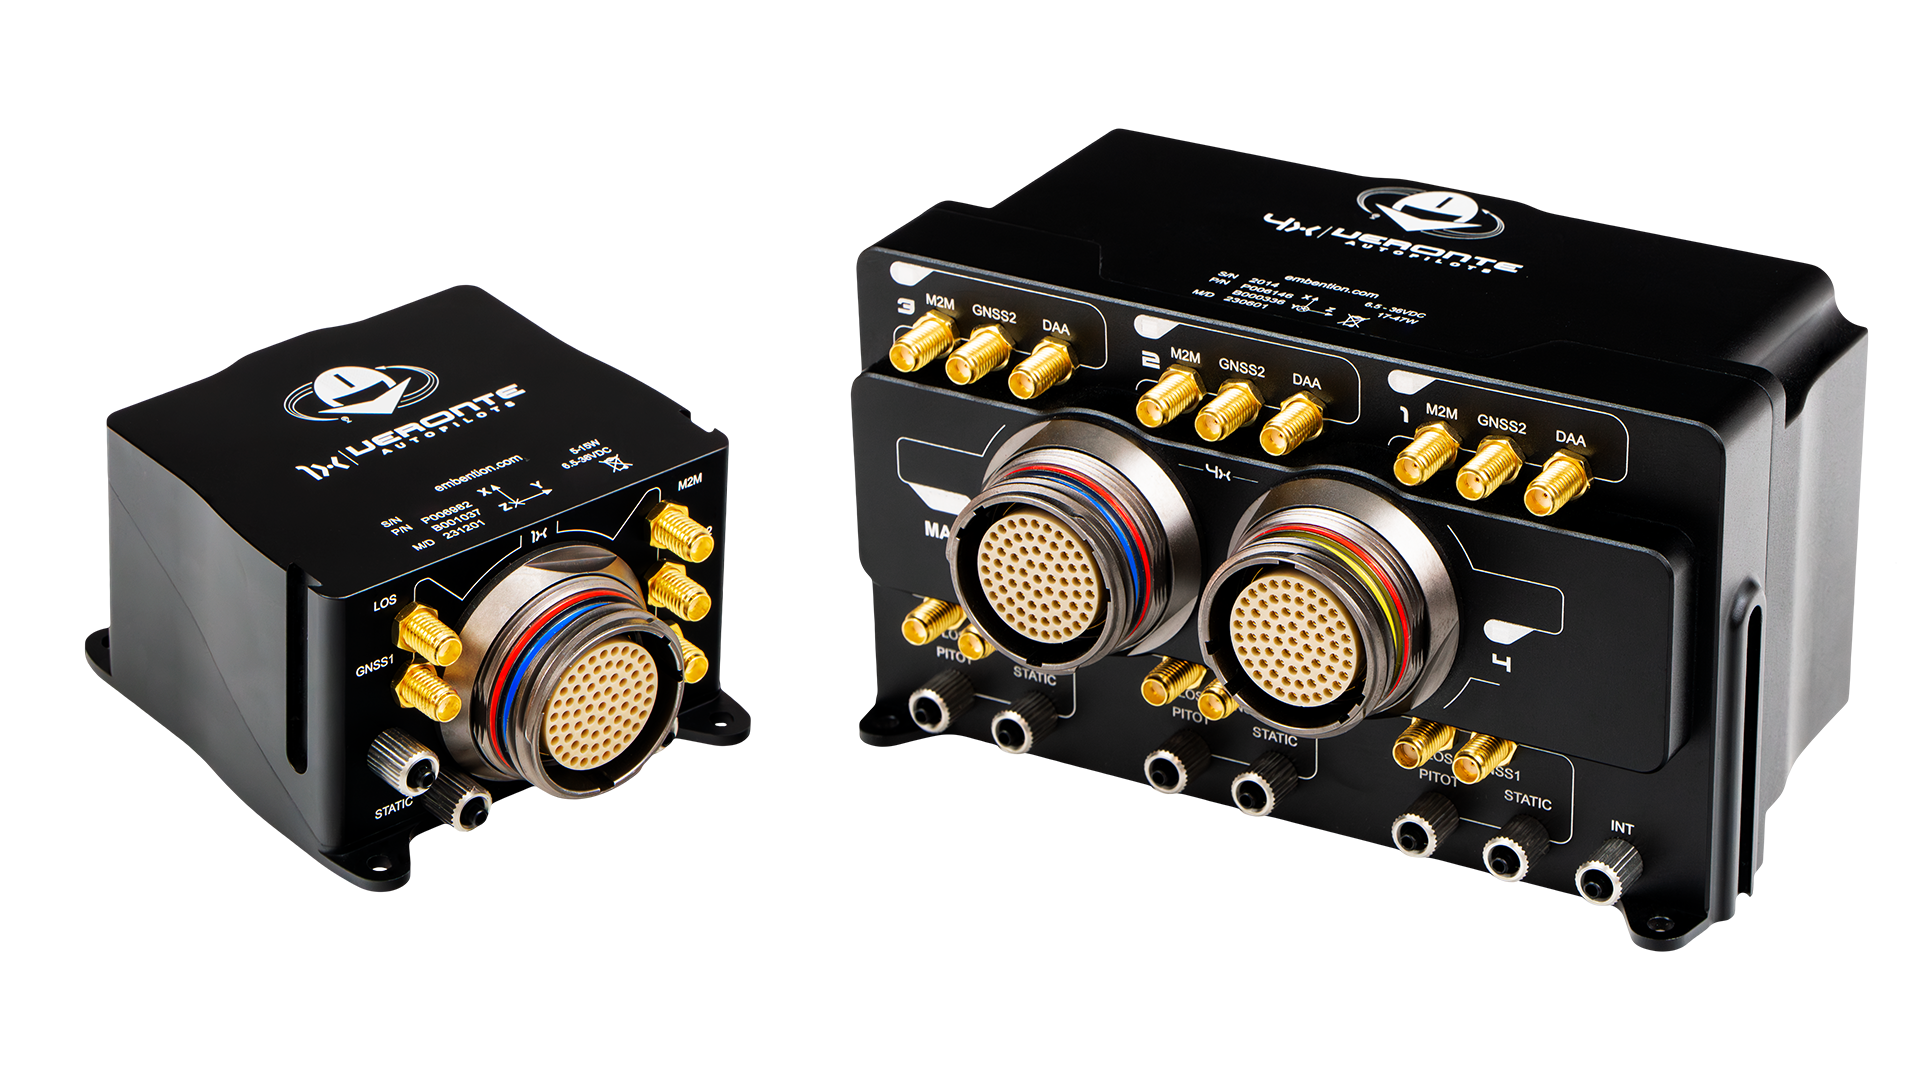 Array of black electronic modules with multiple gold-plated connectors, each featuring a central circular multi-pin port and various labeled ports like 'GNSS2', 'M2M', and 'PITOT', all mounted on a reflective surface.